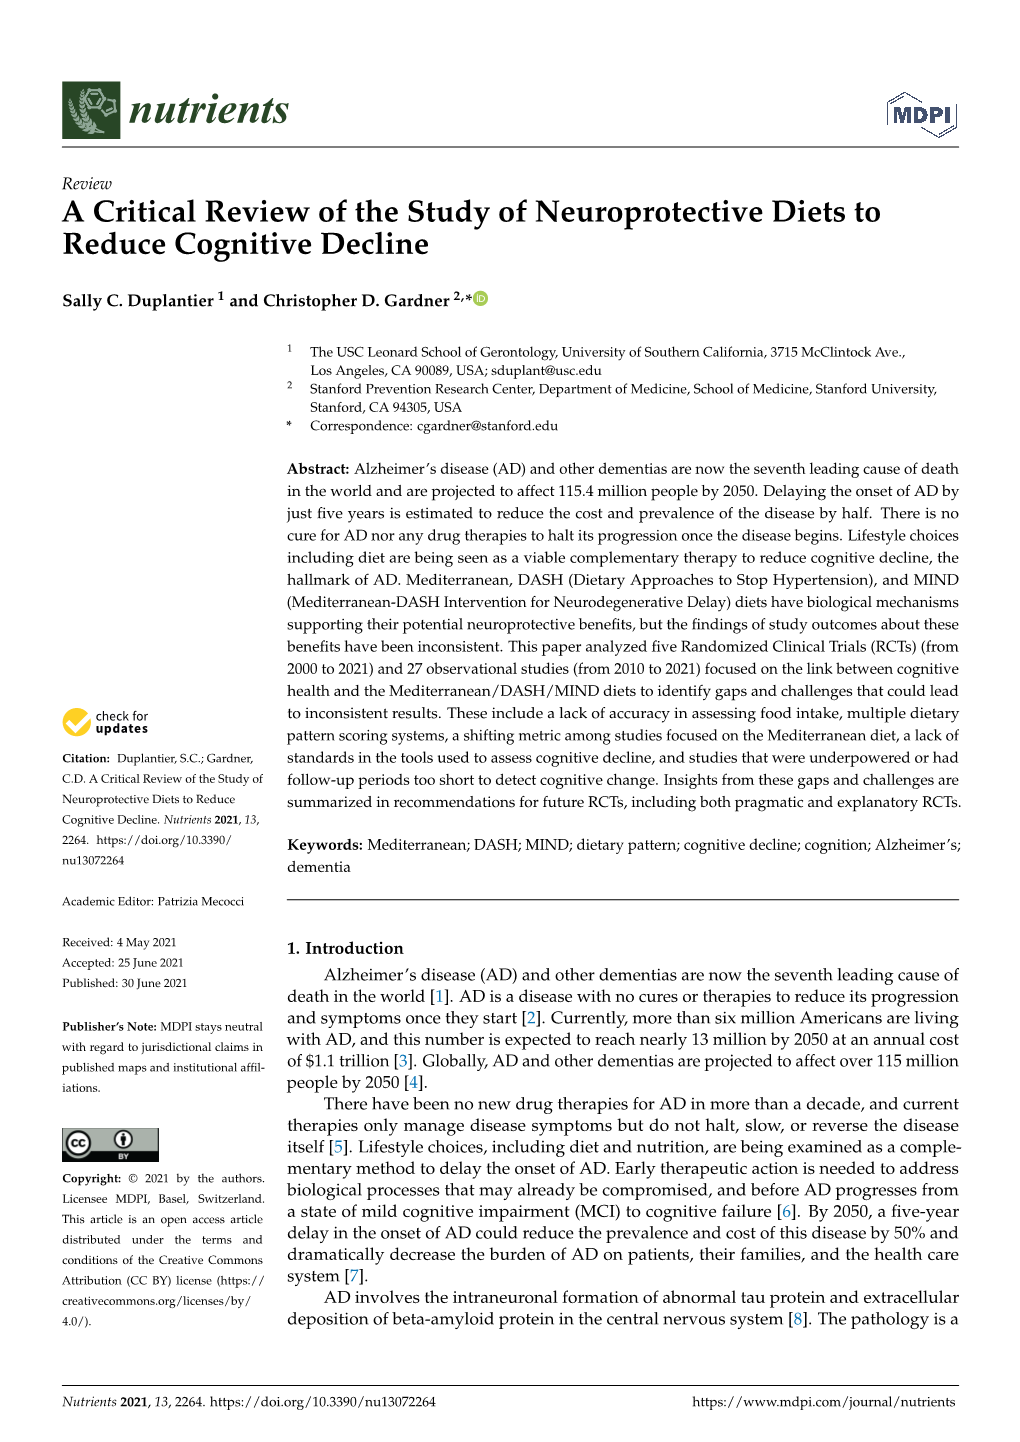 A Critical Review of the Study of Neuroprotective Diets to Reduce Cognitive Decline